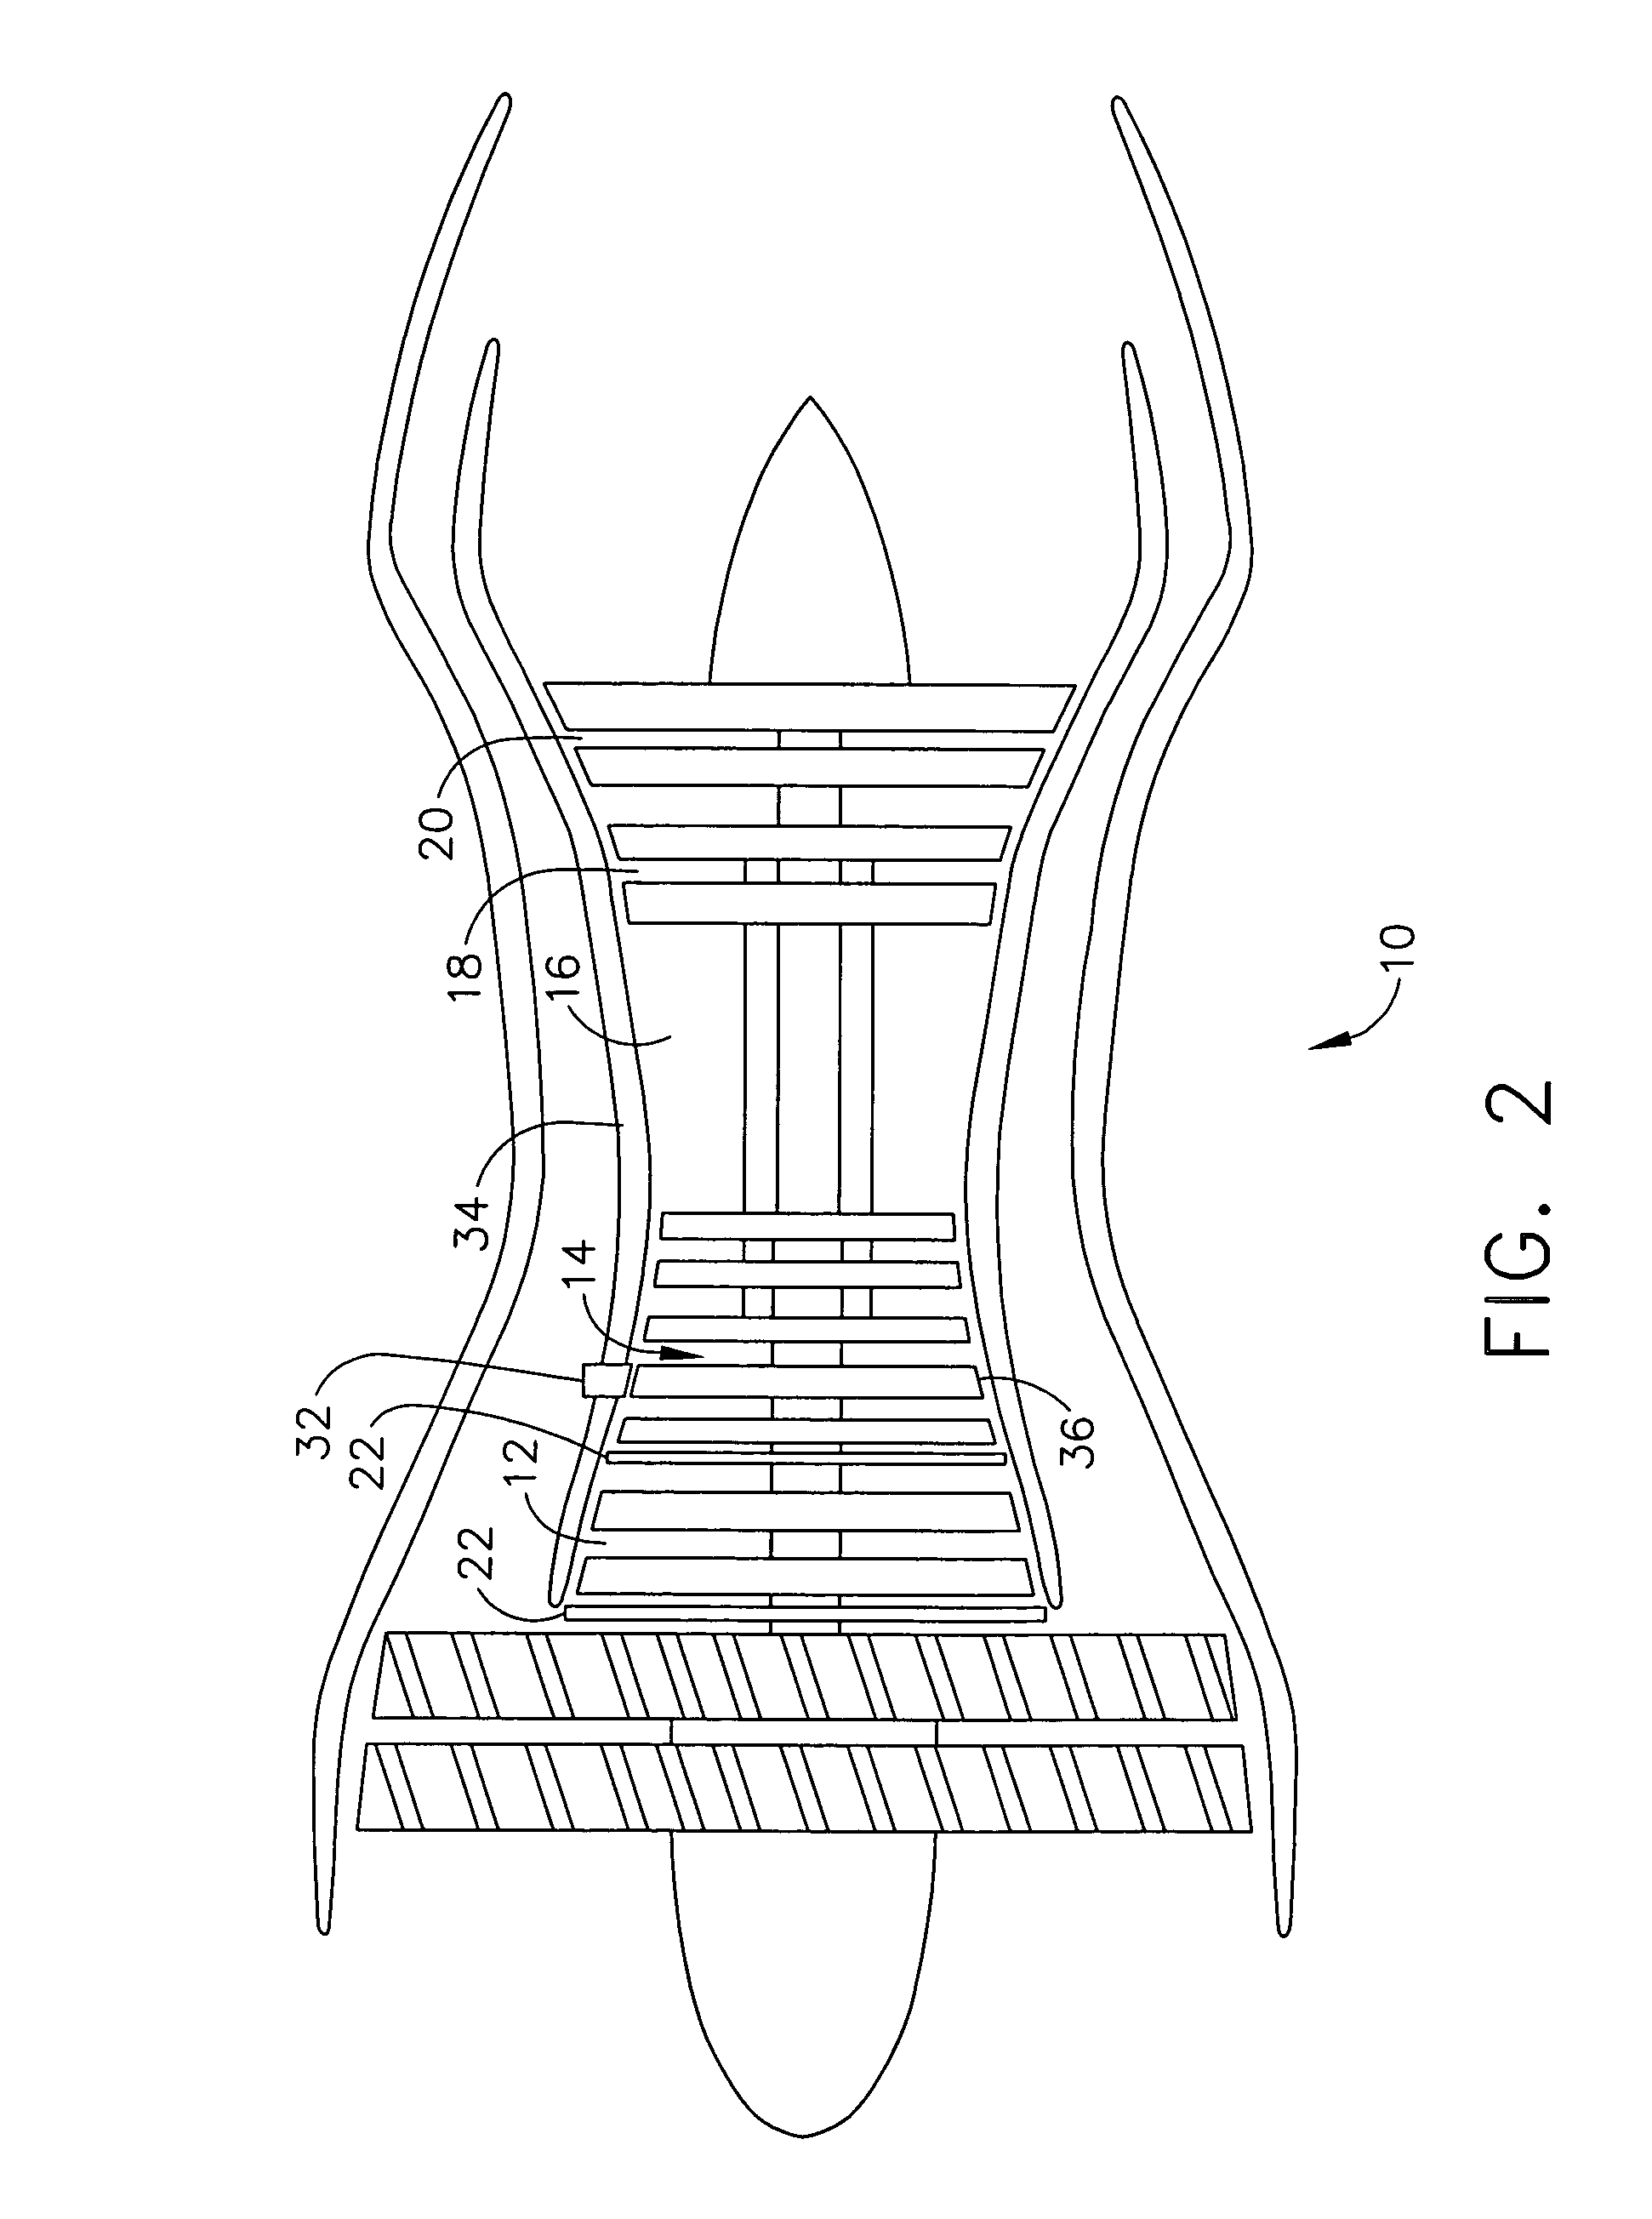 Method and apparatus for an aerodynamic stability management system